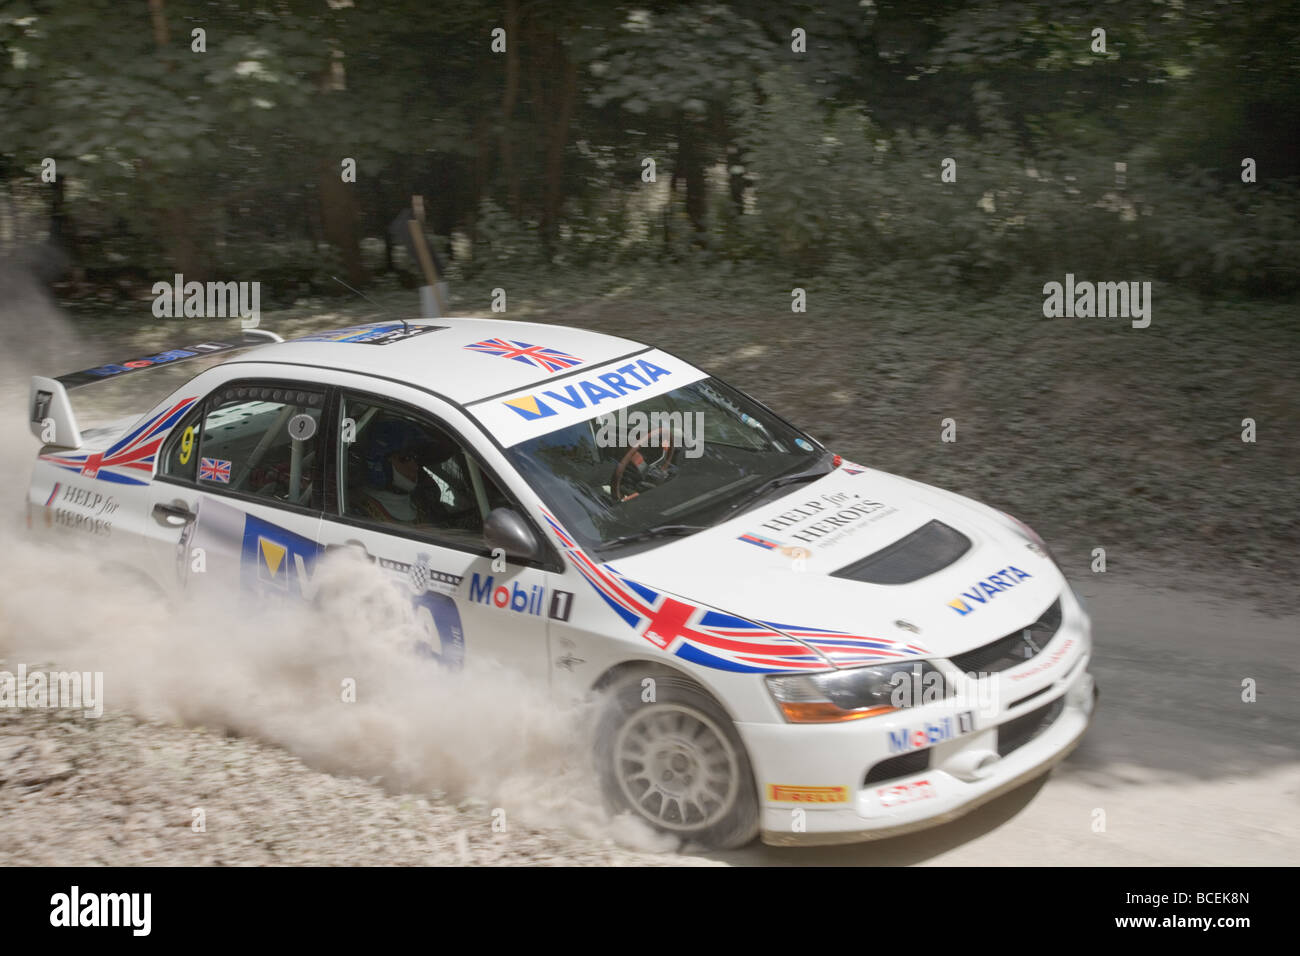 Rally car at the Goodwood Festival of Speed 2009 motion blur Stock Photo